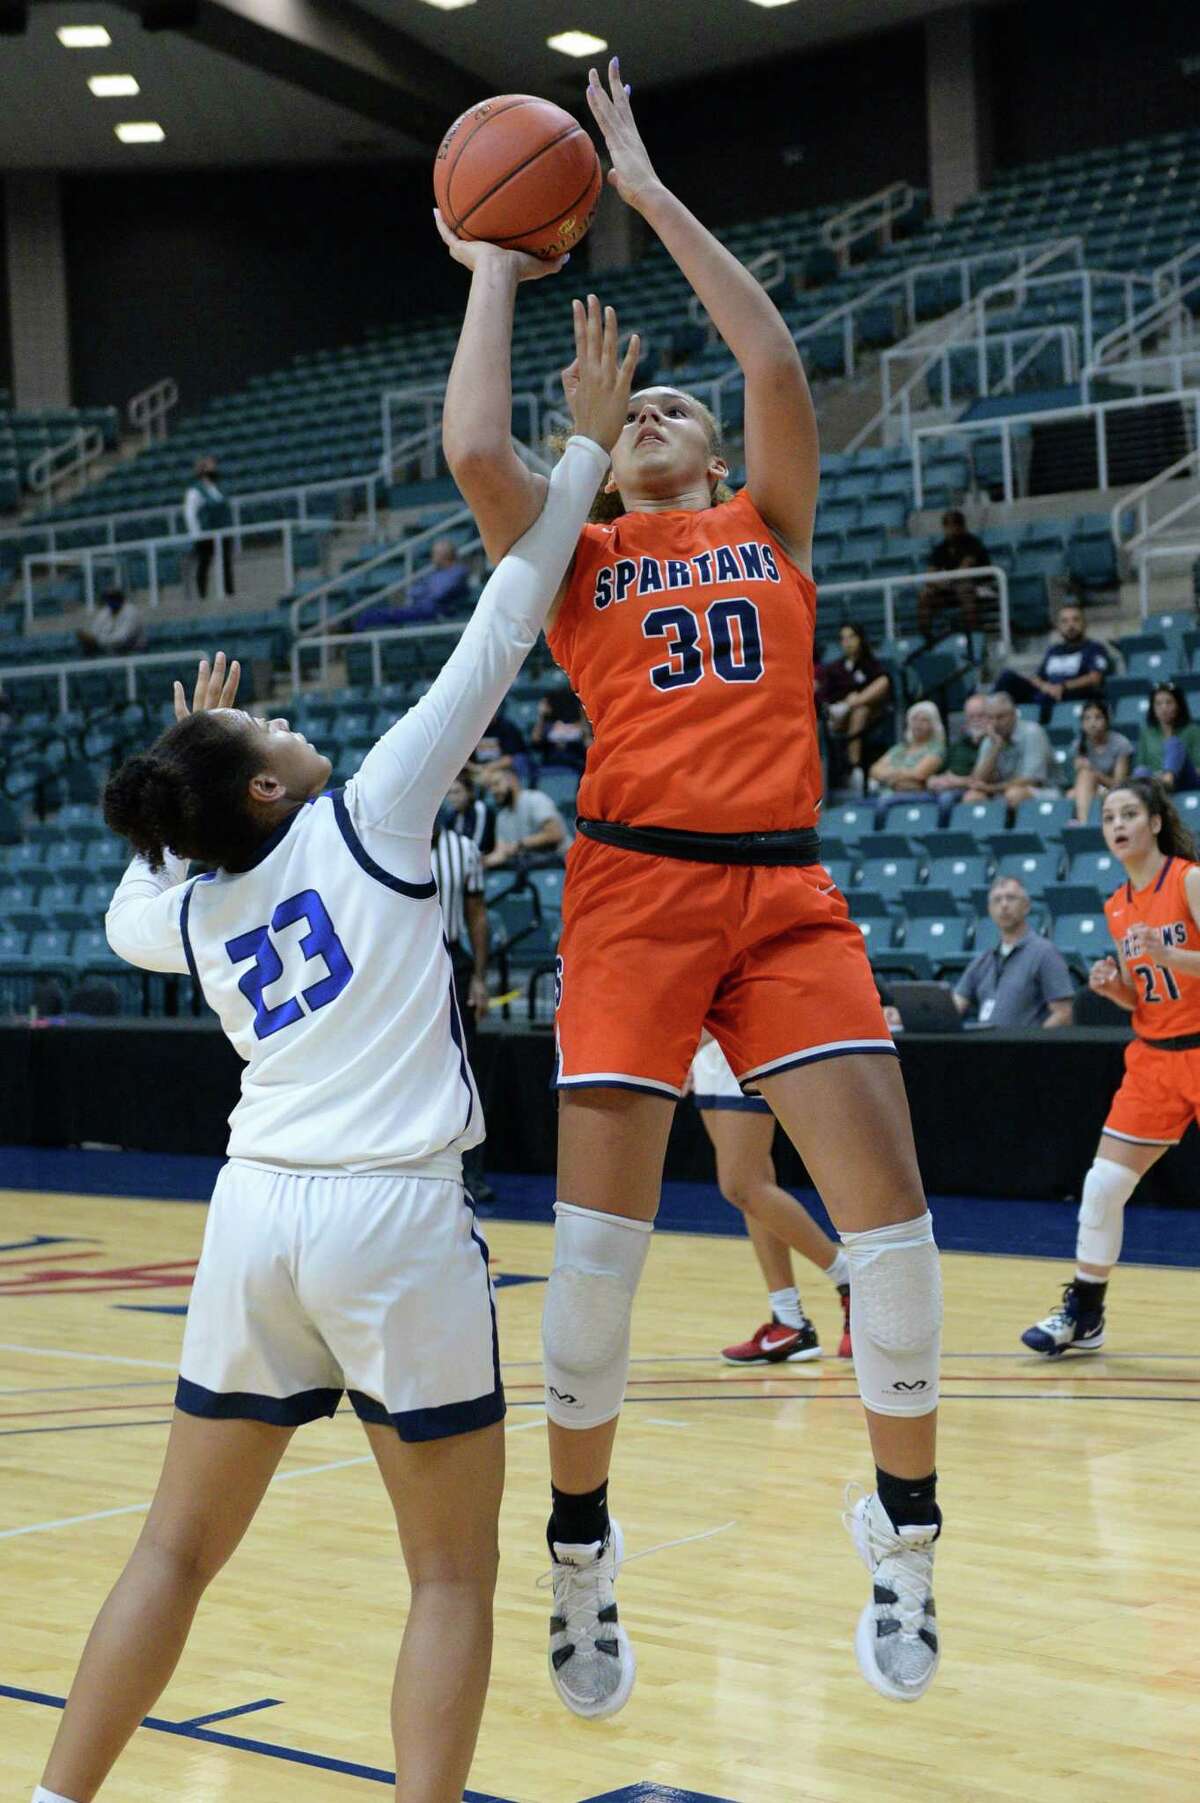 Justice Carlton (30) of Seven Lakes attempts a shot past Aryn Roberts (23) of Allen during the second half of the championship game between the Seven Lakes Spartans and the Allen Eagles in the Katy ISD Basketball Classic on Saturday, December 5, 2021 at the Leonard Merrill Center, Katy, TX.